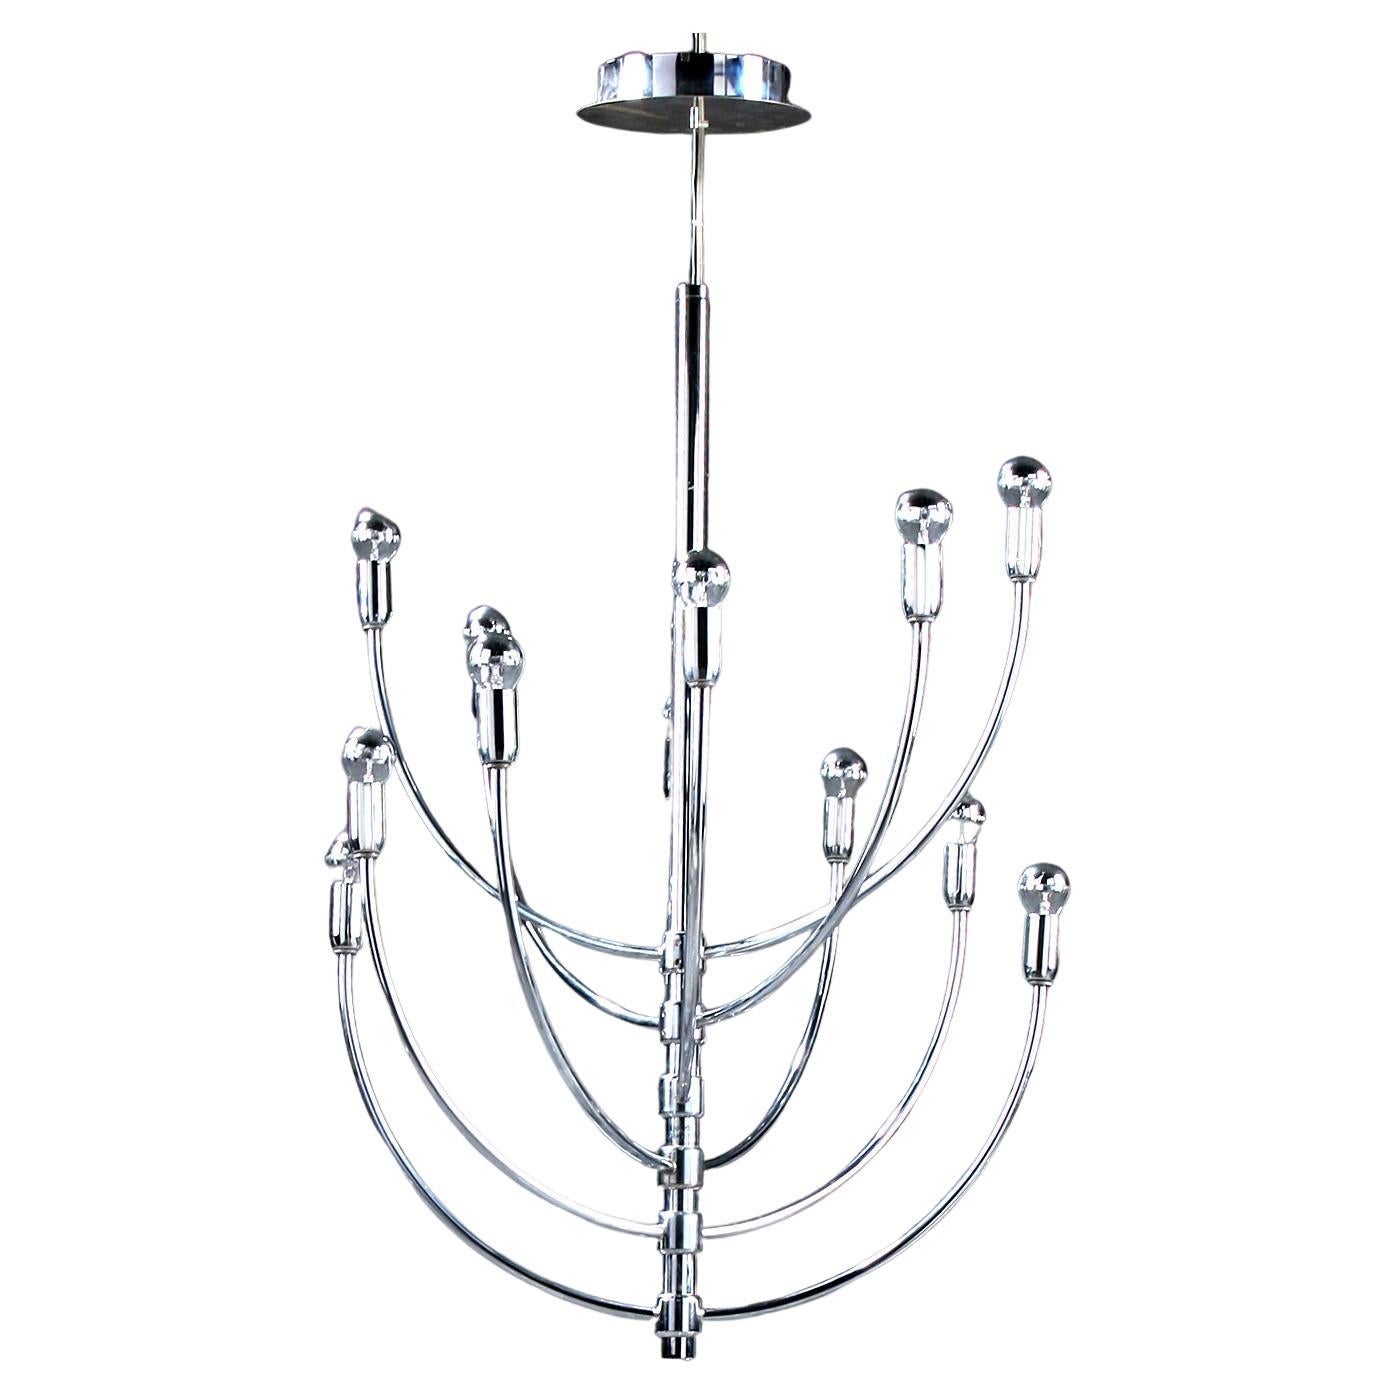 Large chrome Piazza San Marco Chandelier design vico magistretti for Oluce Italy For Sale